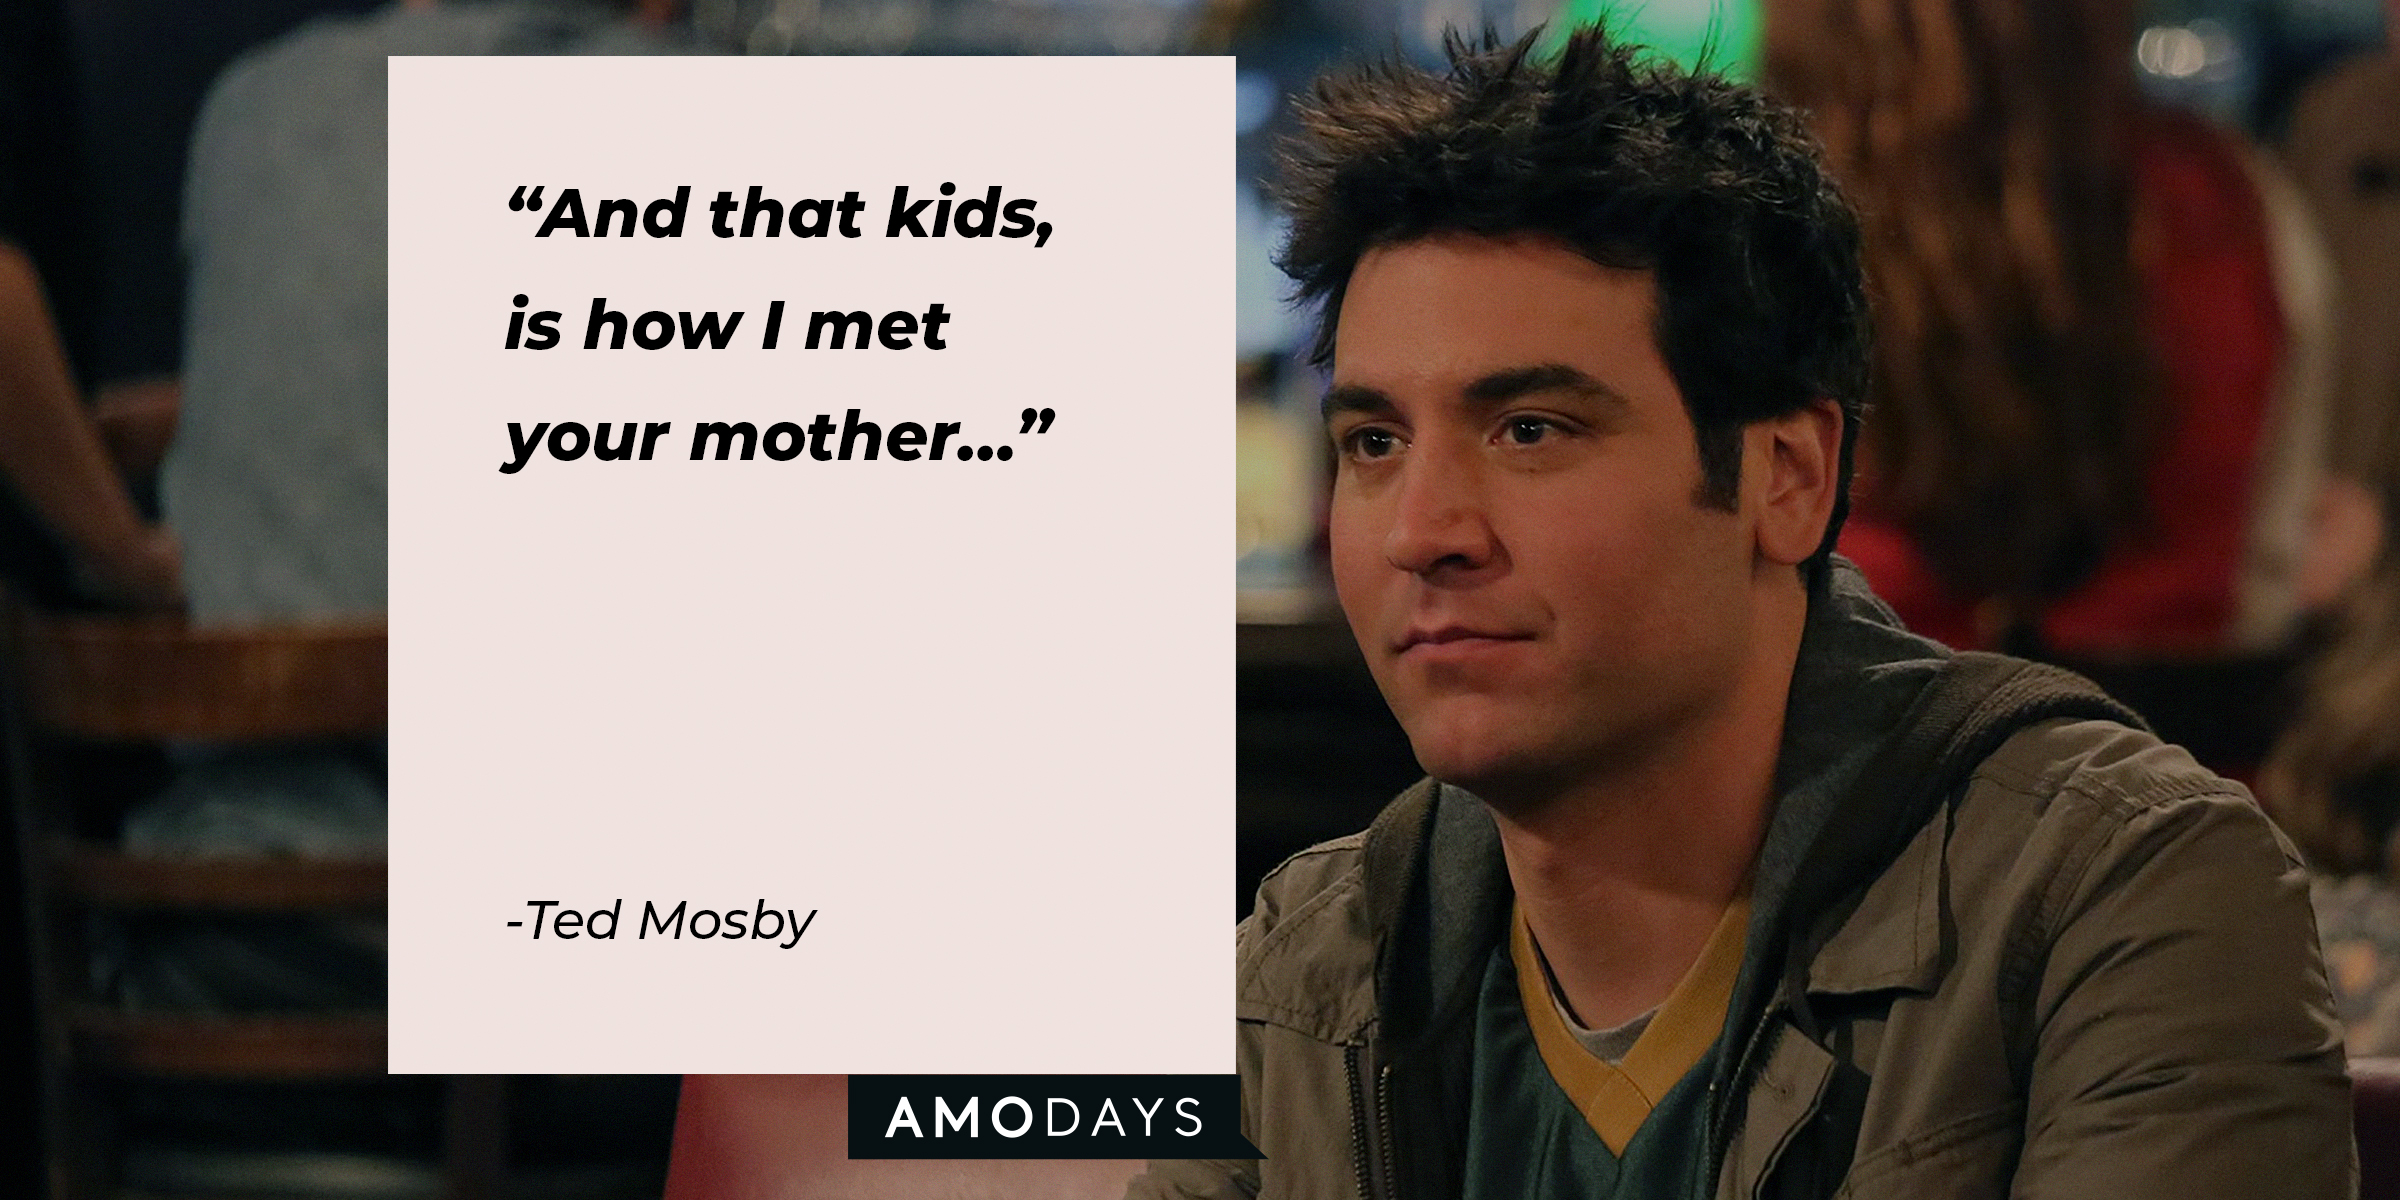 A picture of Ted Mosby with his quote, “And that kids, is how I met your mother…” | Source: facebook.com/OfficialHowIMetYourMother